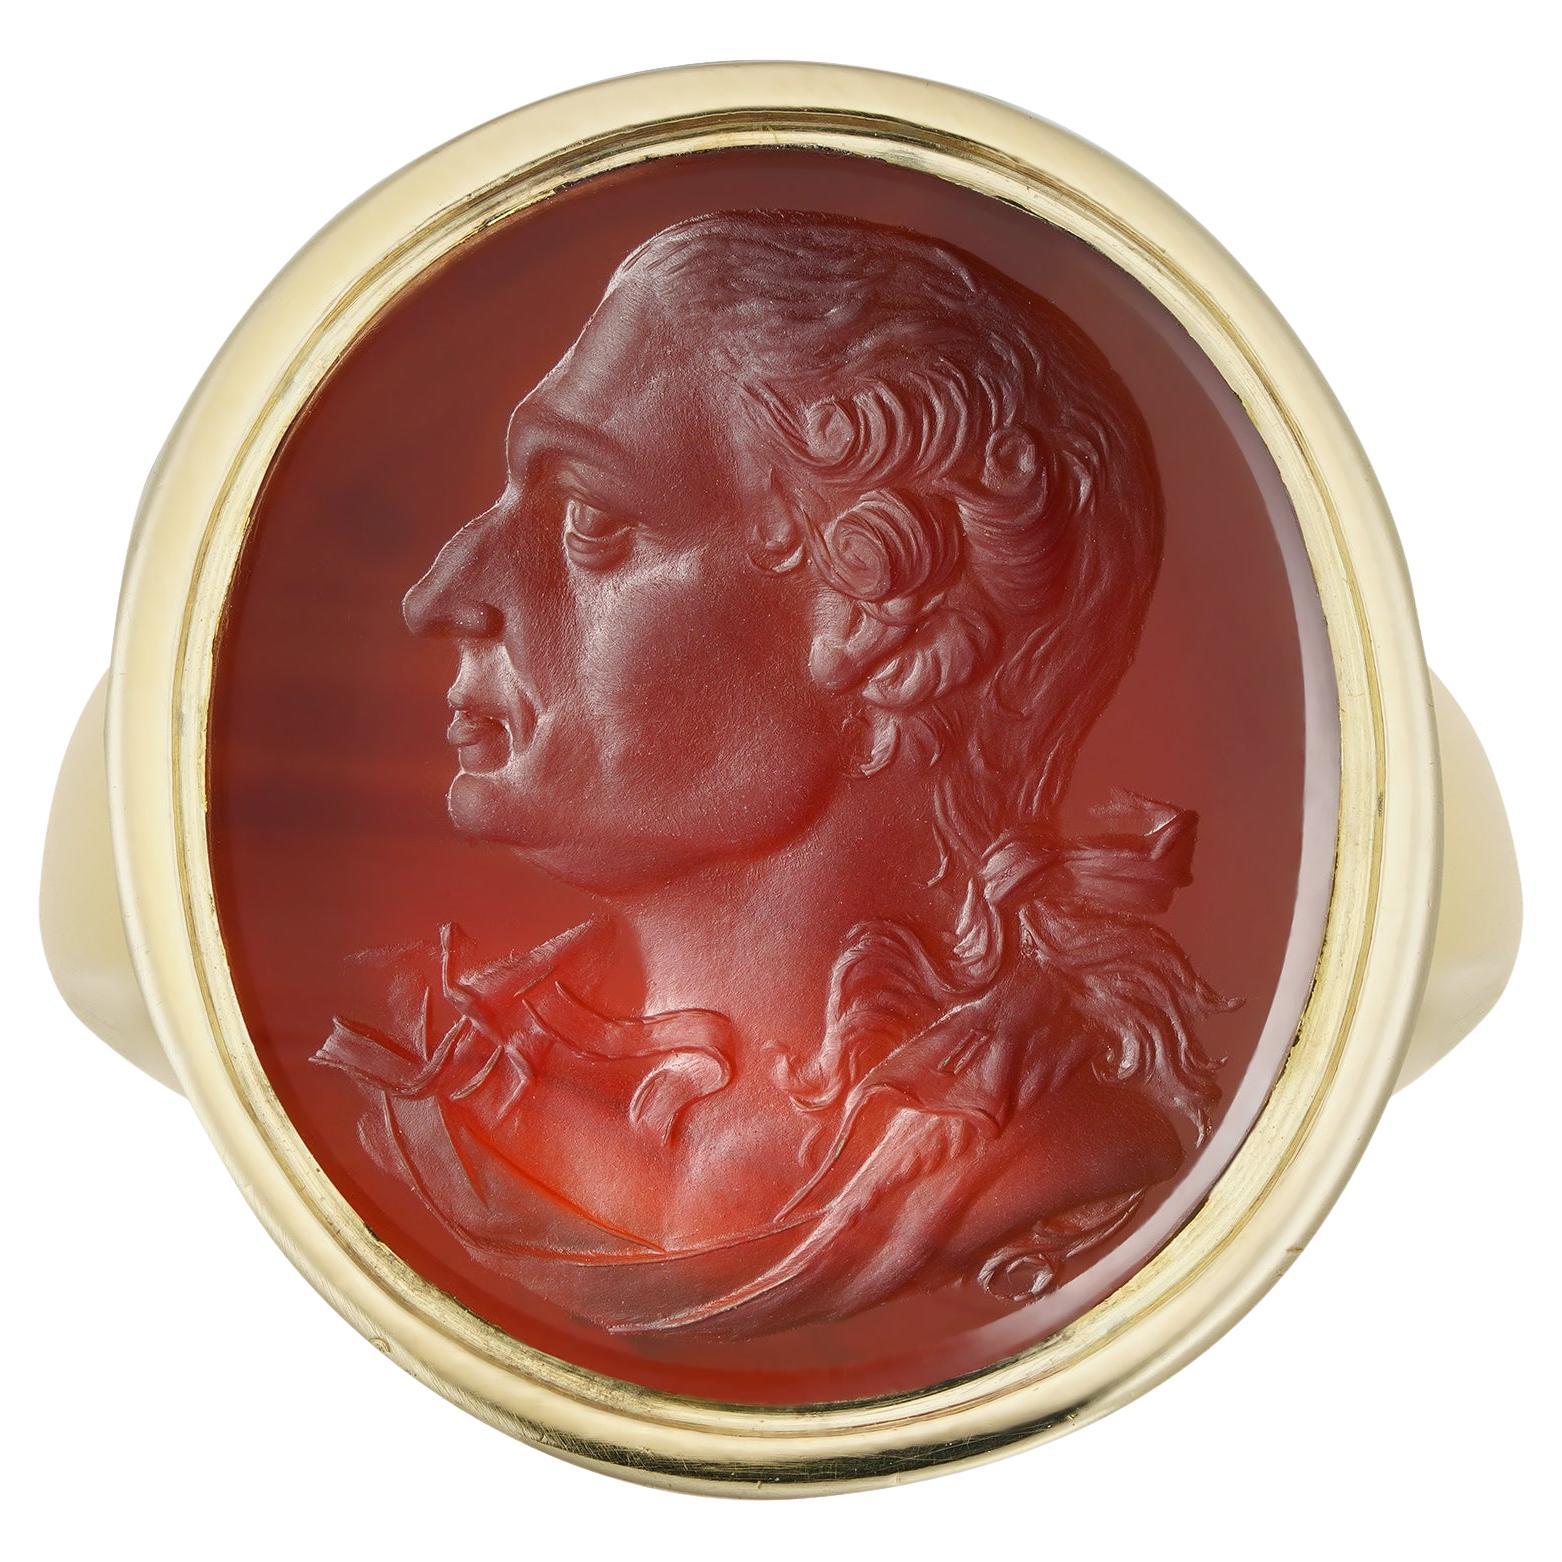 An 18th C Carnelian Intaglio Of David Garrick As A Ring For Sale